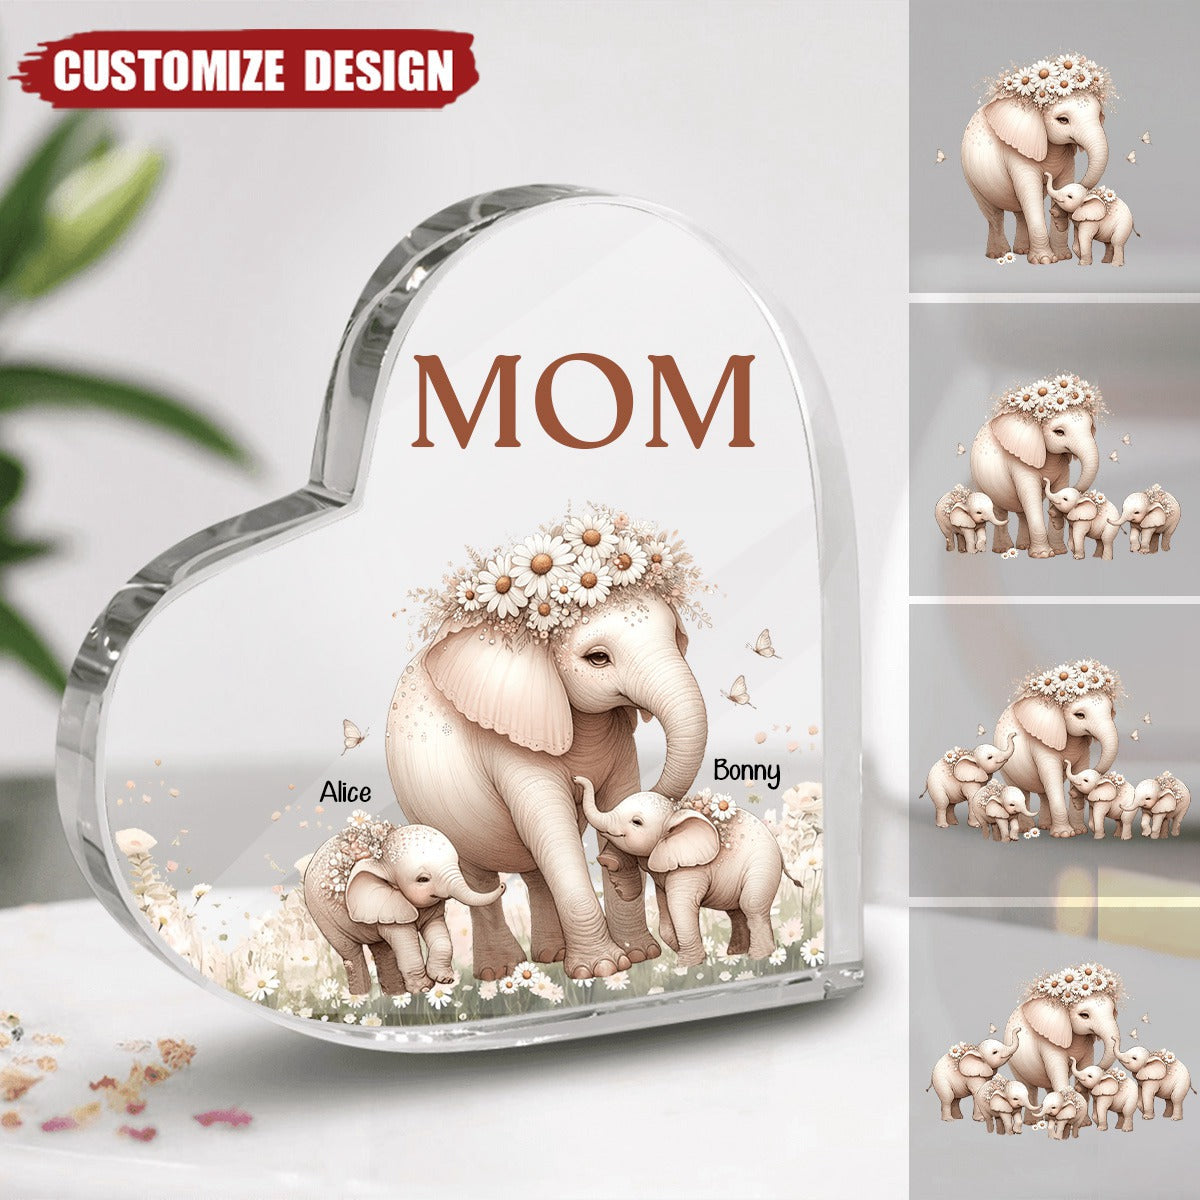 Mama Elephant With Little Kids Personalized Acrylic Plaque Mother's Day Gift